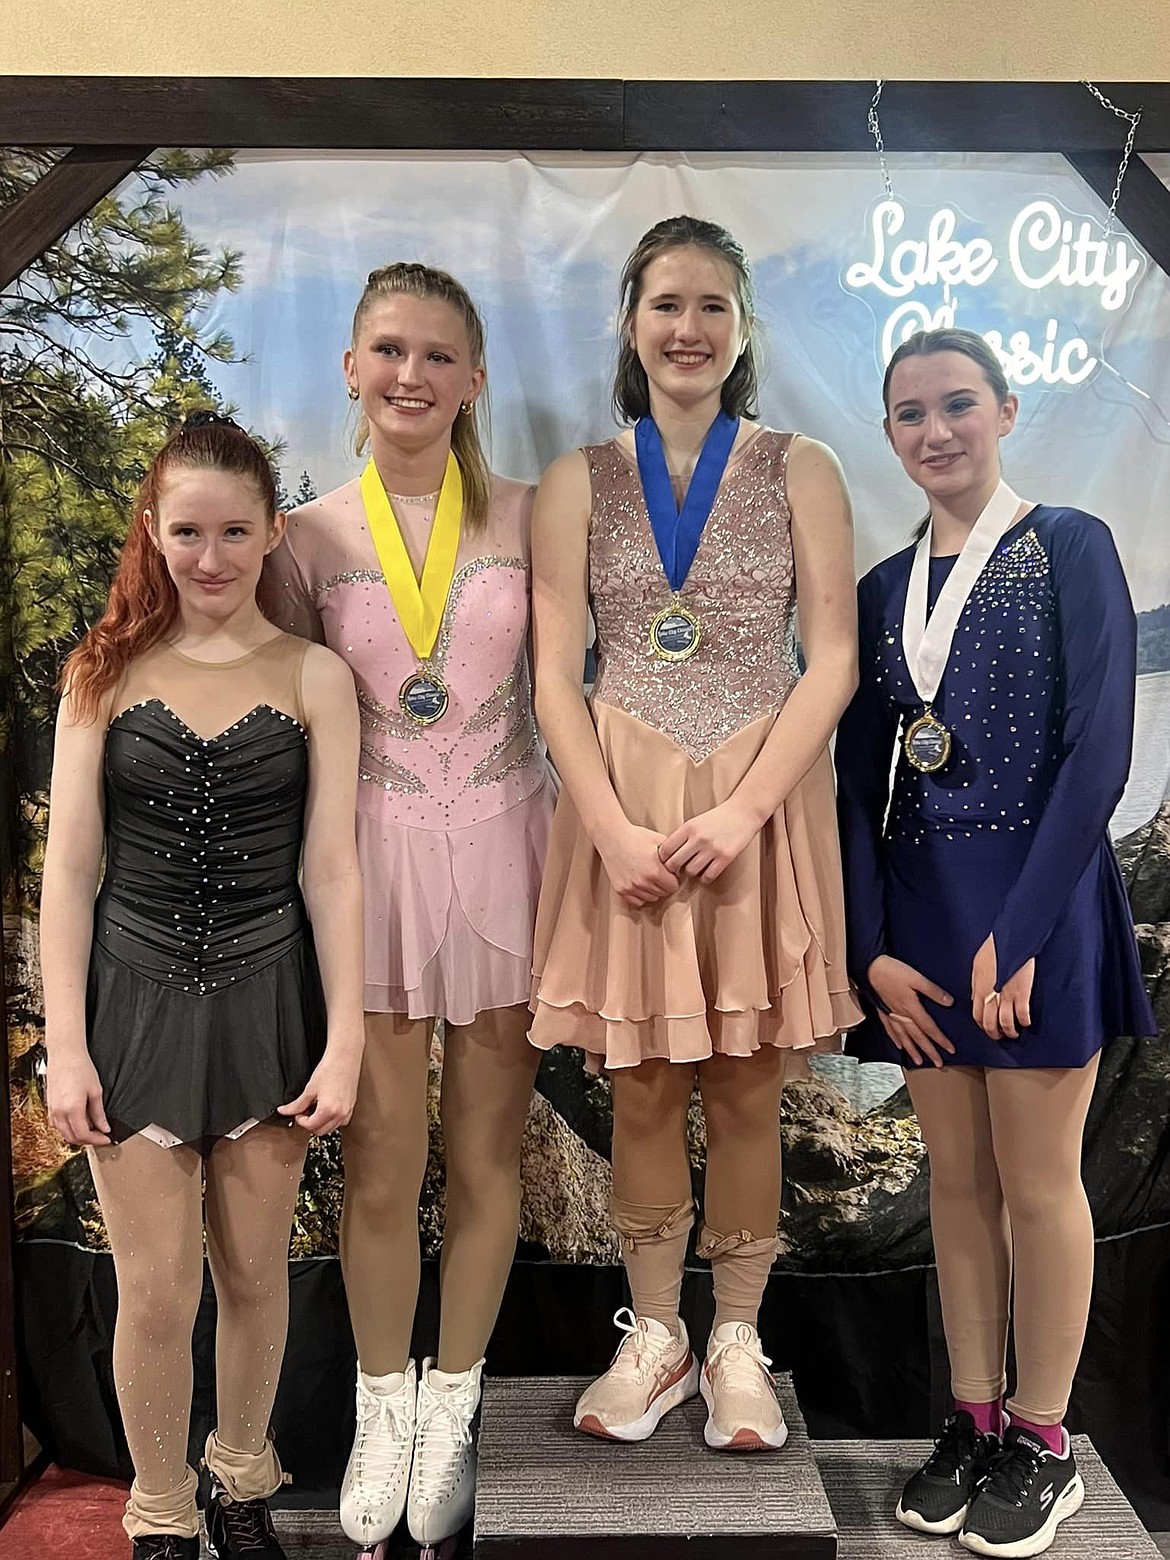 Courtesy photo
From left, Peyton Schultz, Savannah Mortimer, Anya Newcombe and Elizabeth Davis, part of the Lake City Figure Skating program of the Spokane Figure Skating Club, which hosted the Lake City Classic on May 17-19 at the Frontier Ice Arena in Coeur d'Alene.